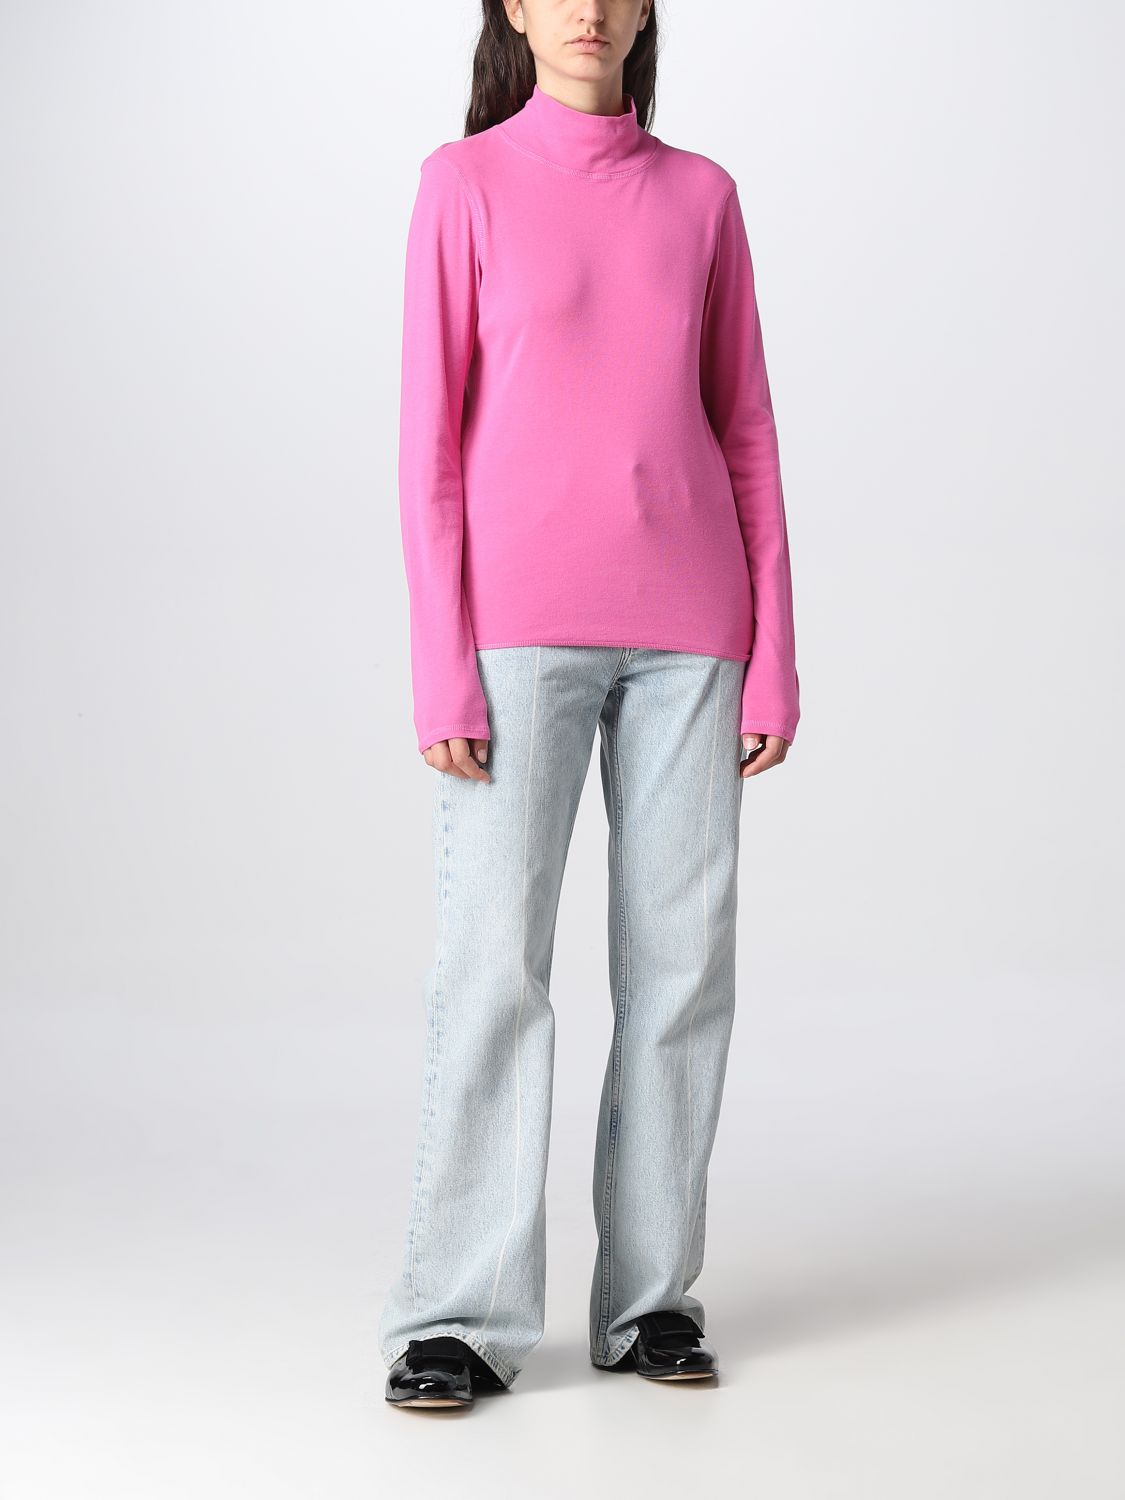 Top Our Legacy: Our Legacy top for woman pink 2